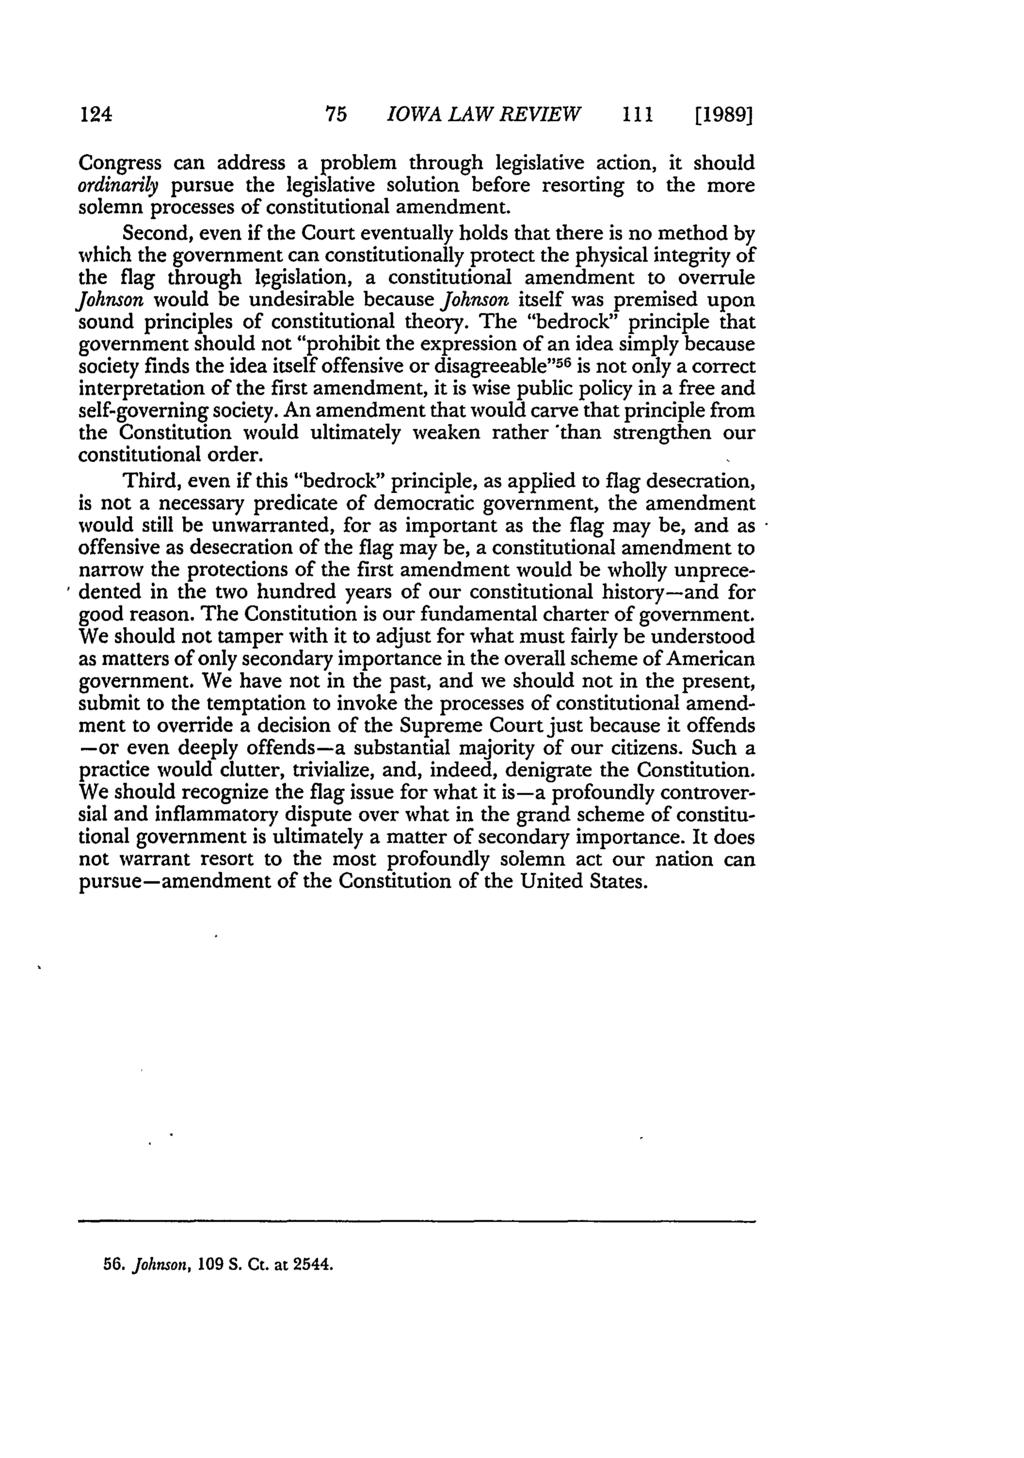 75 IOWA LAW REVIEW ill [1989] Congress can address a problem through legislative action, it should ordinarily pursue the legislative solution before resorting to the more solemn processes of